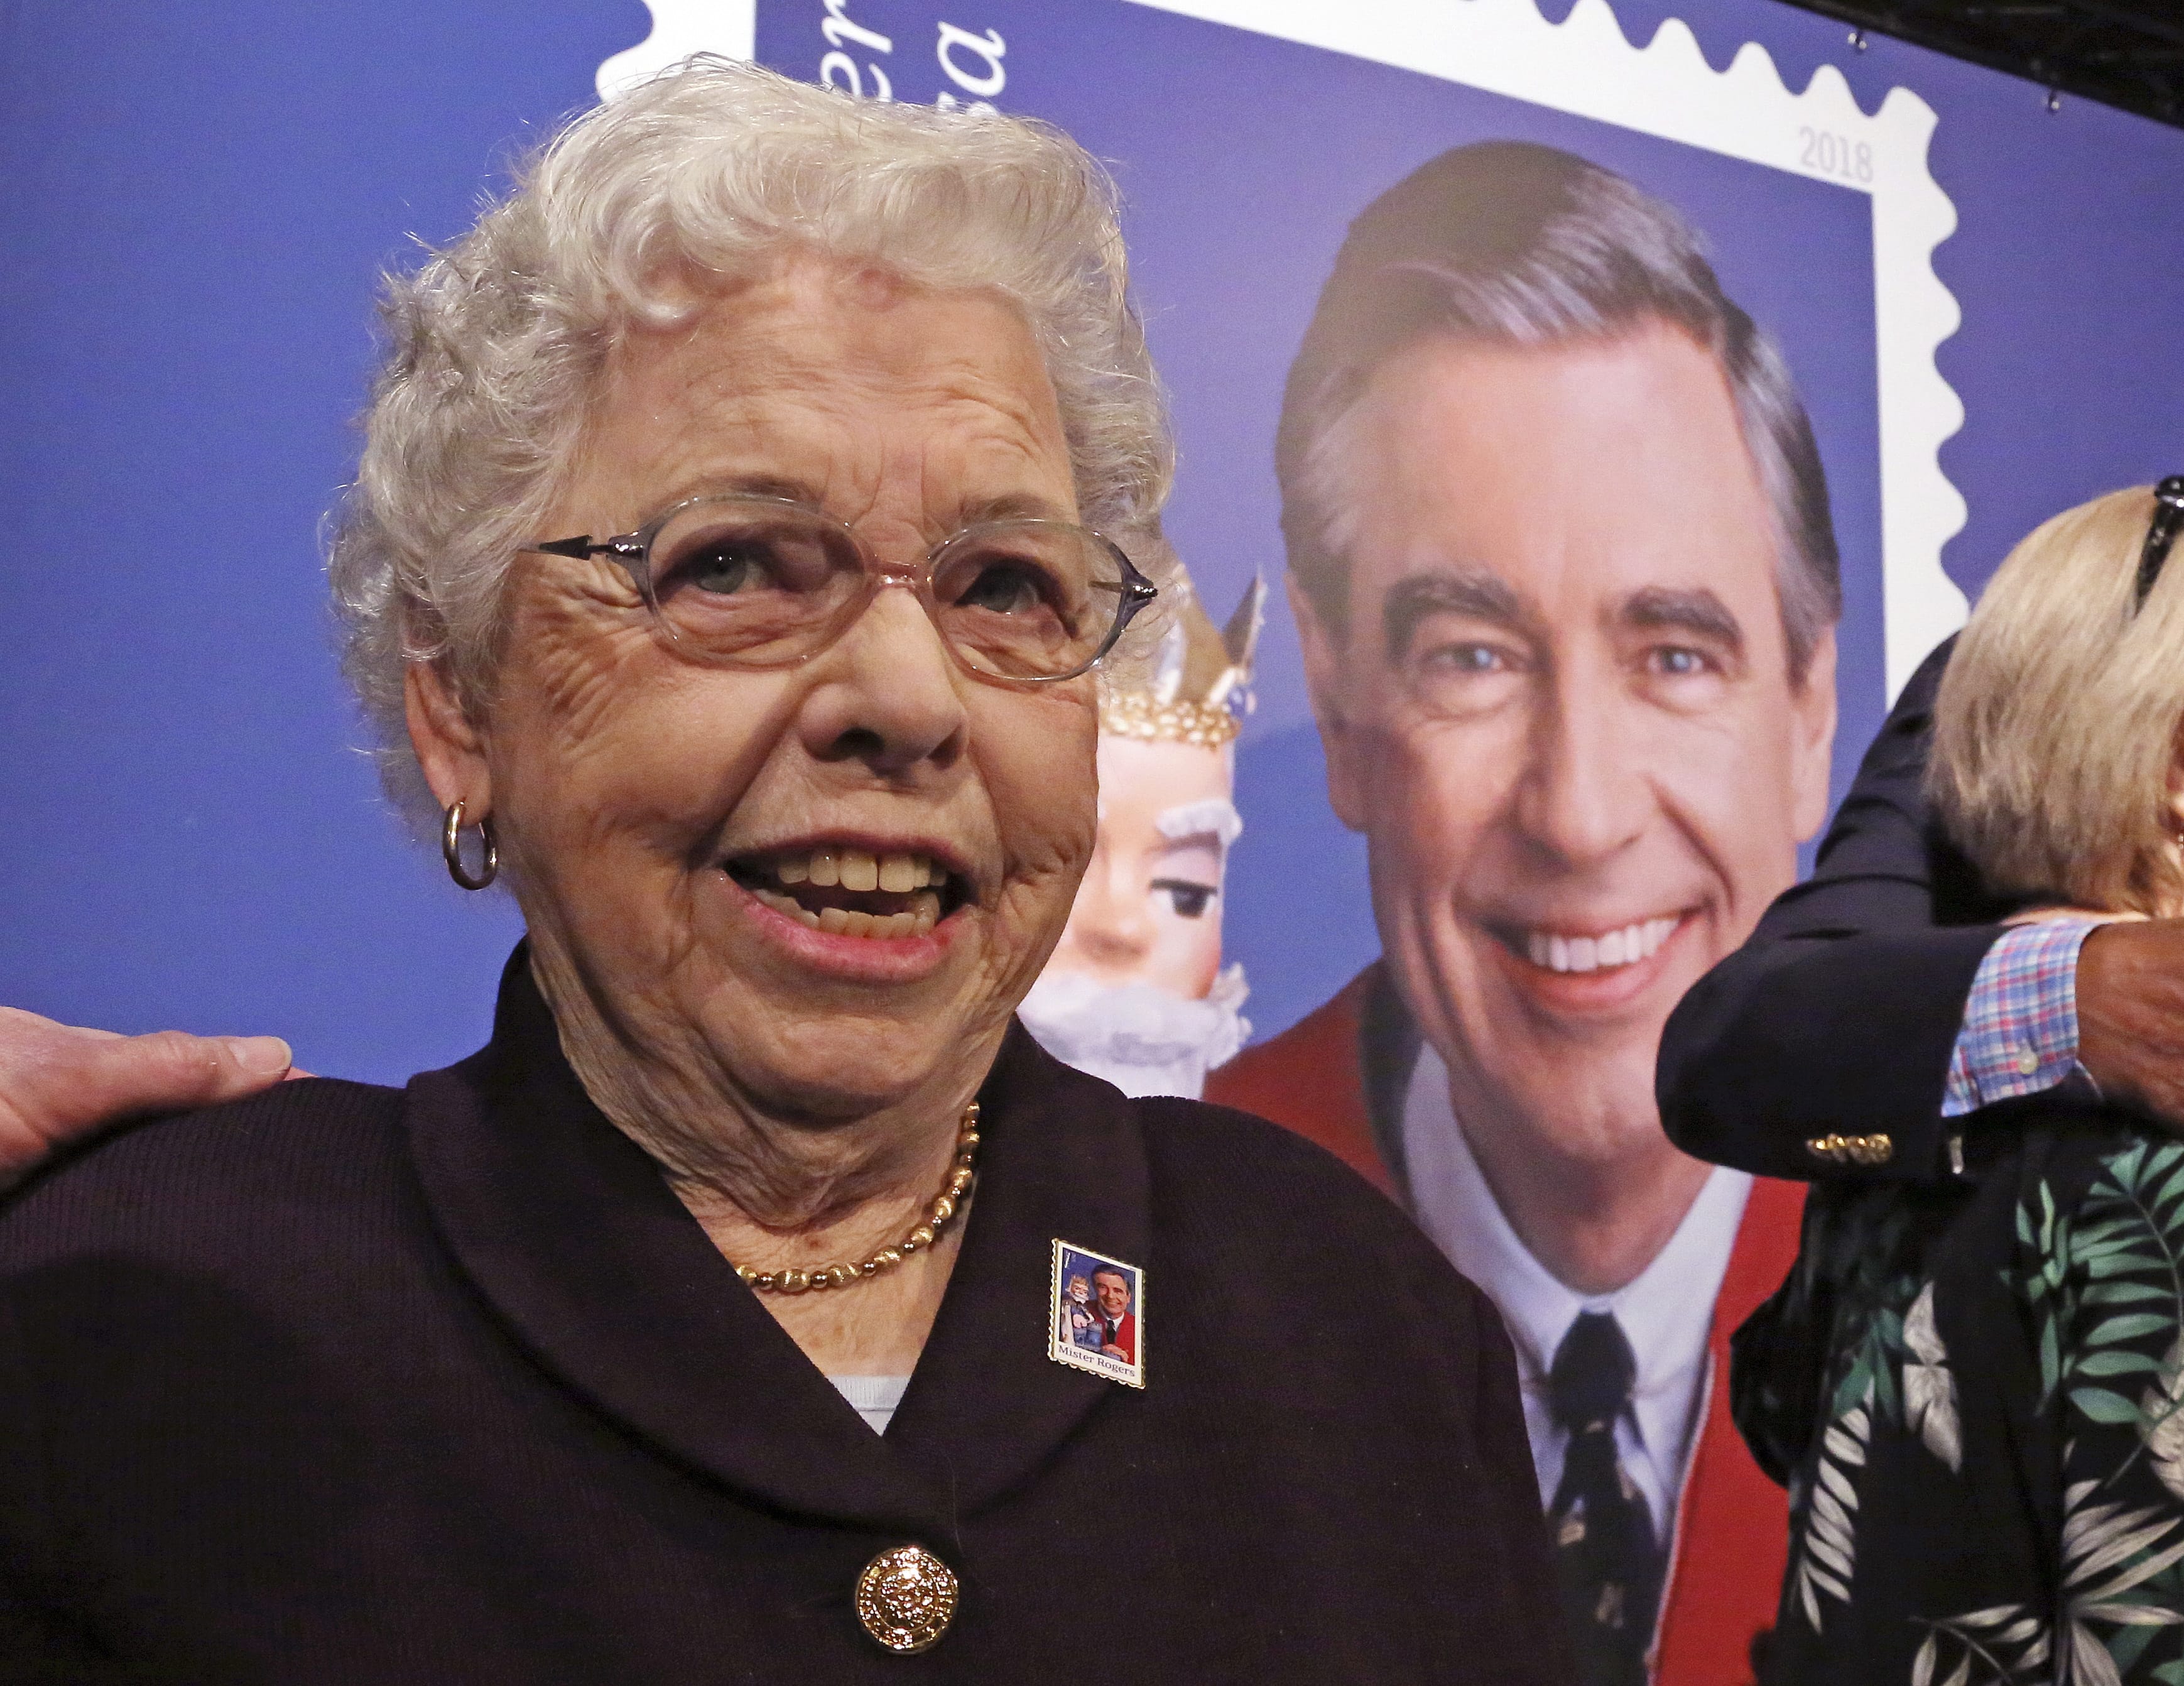 Joanne Rogers, widow of Fred Rogers, visits with friends in front of a giant Mister Rogers Forever Stamp following the first-day-of-issue dedication in WQED's Fred Rogers Studio in Pittsburgh, Friday, March 23, 2018. (AP Photo/Gene J.